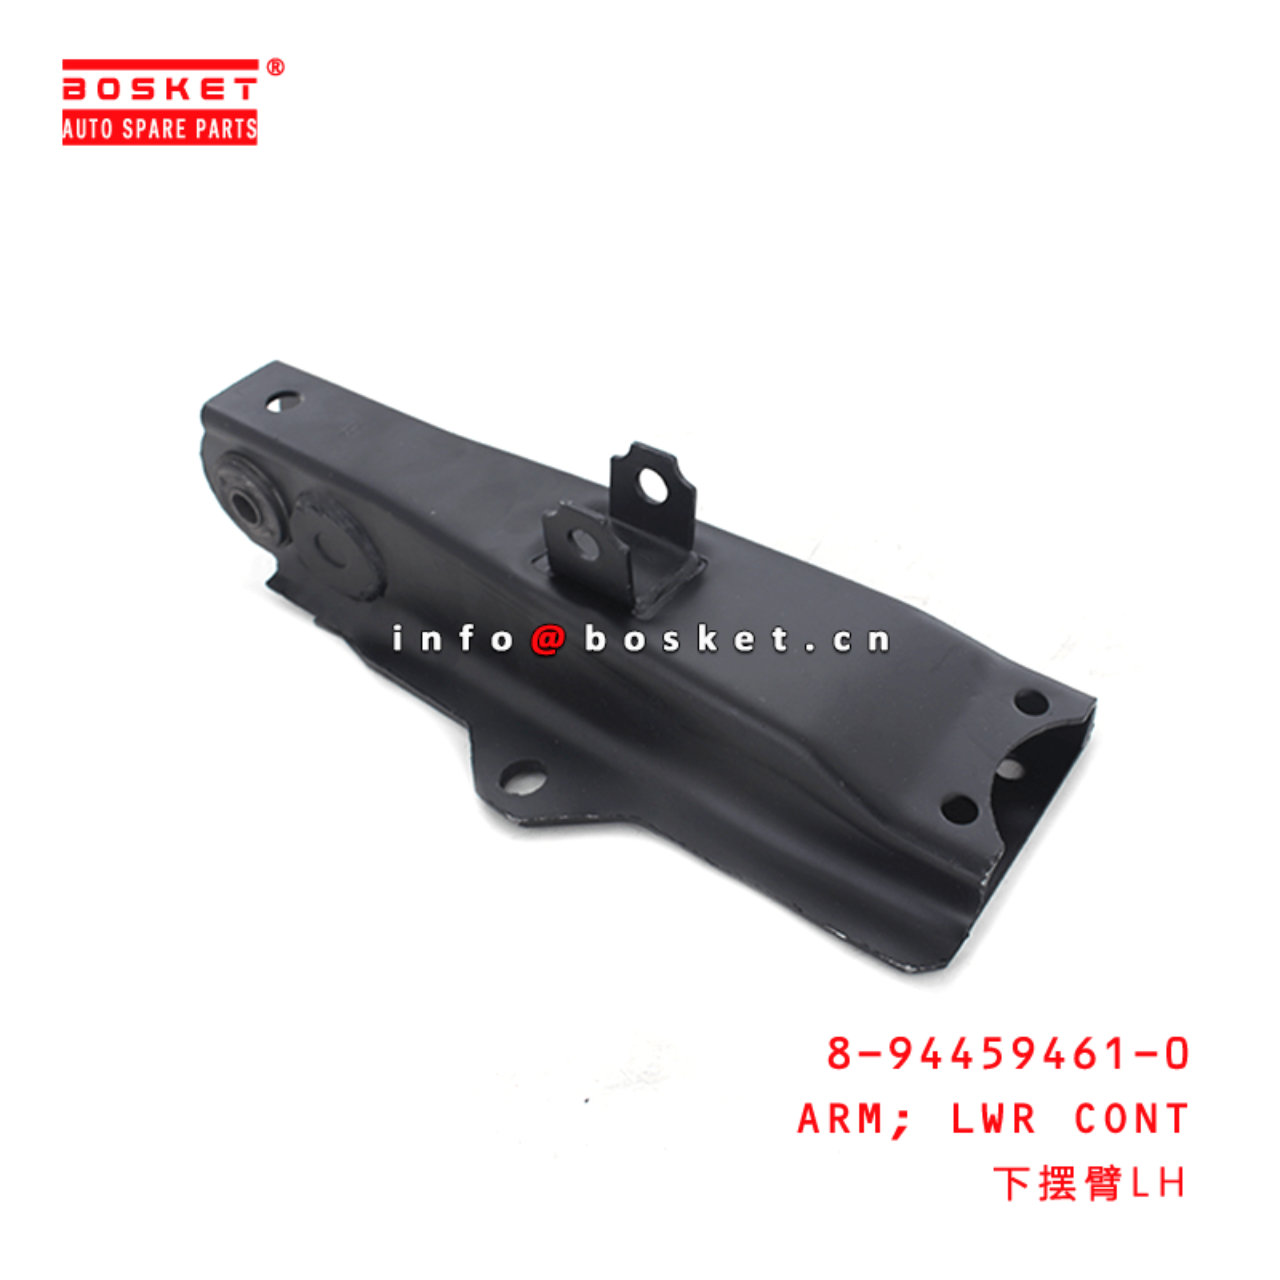  8-94459461-0 Lower Control Arm 8944594610 Suitable for ISUZU TFR54